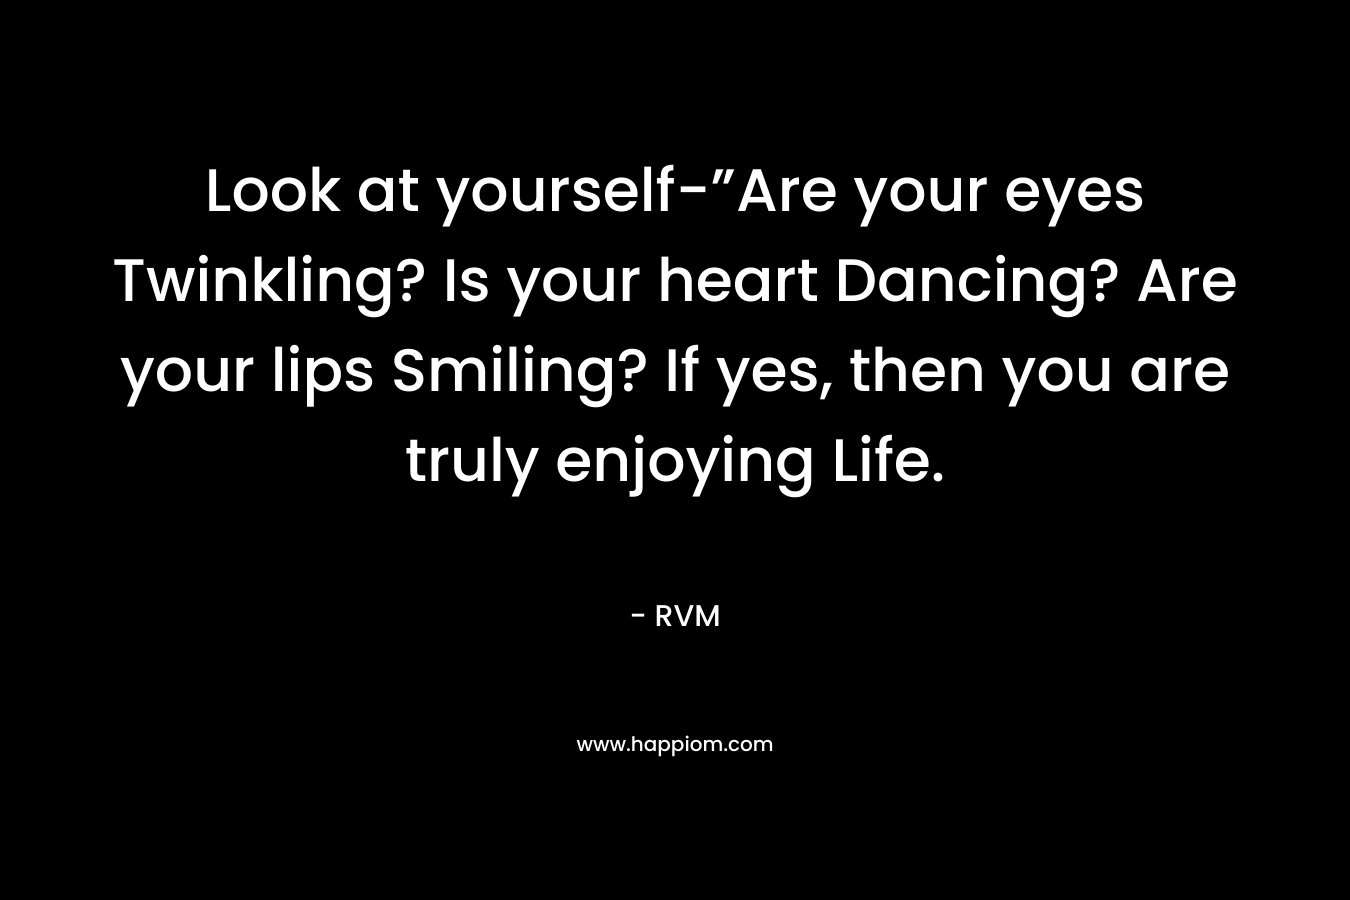 Look at yourself-”Are your eyes Twinkling? Is your heart Dancing? Are your lips Smiling? If yes, then you are truly enjoying Life.